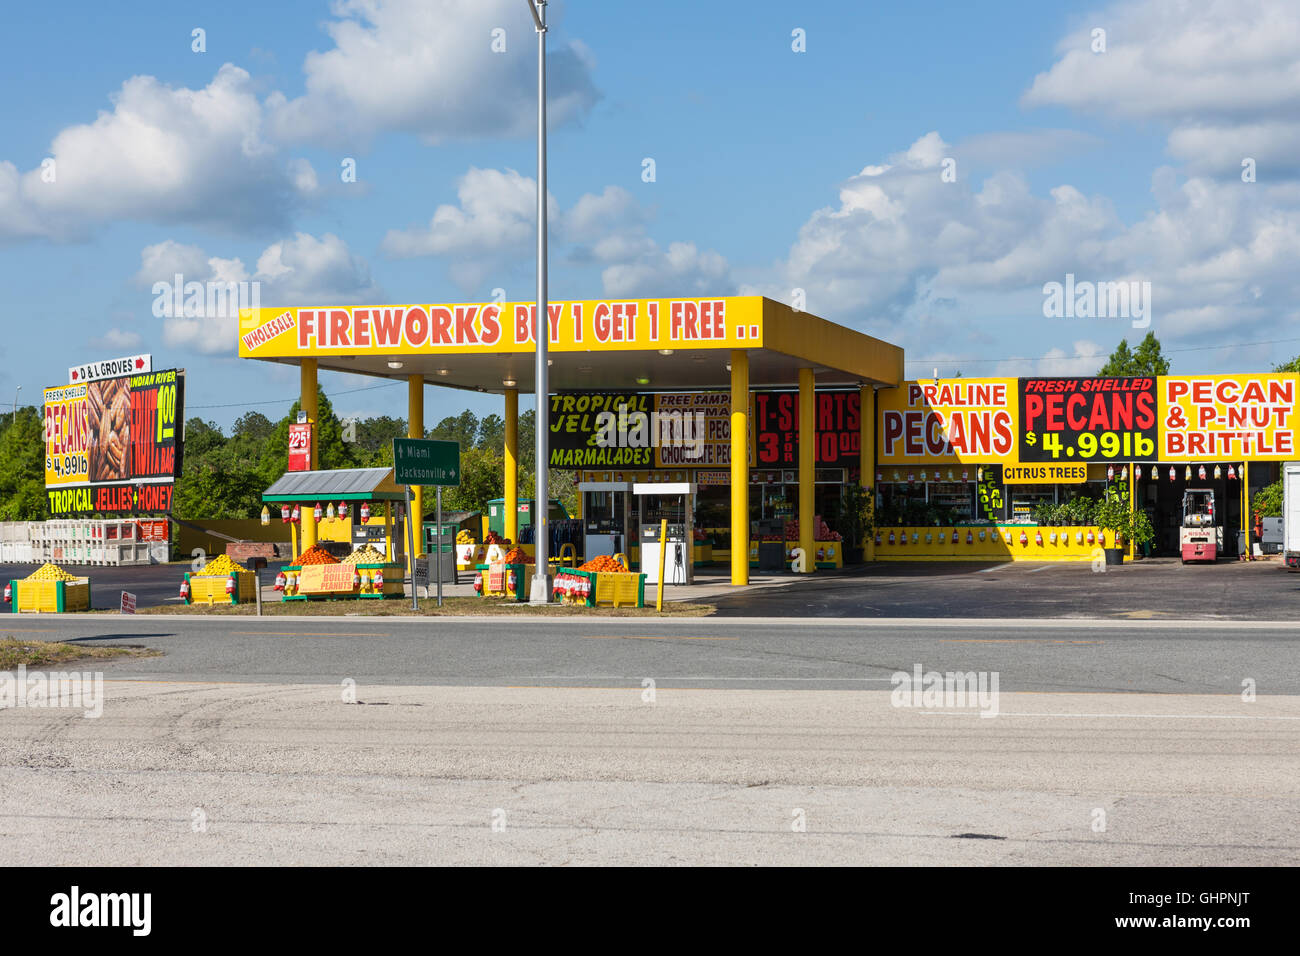 The colorful Pecan Outlet sells pecans, candies, and other sweets along with fireworks in St. Augustine, Florida. Stock Photo